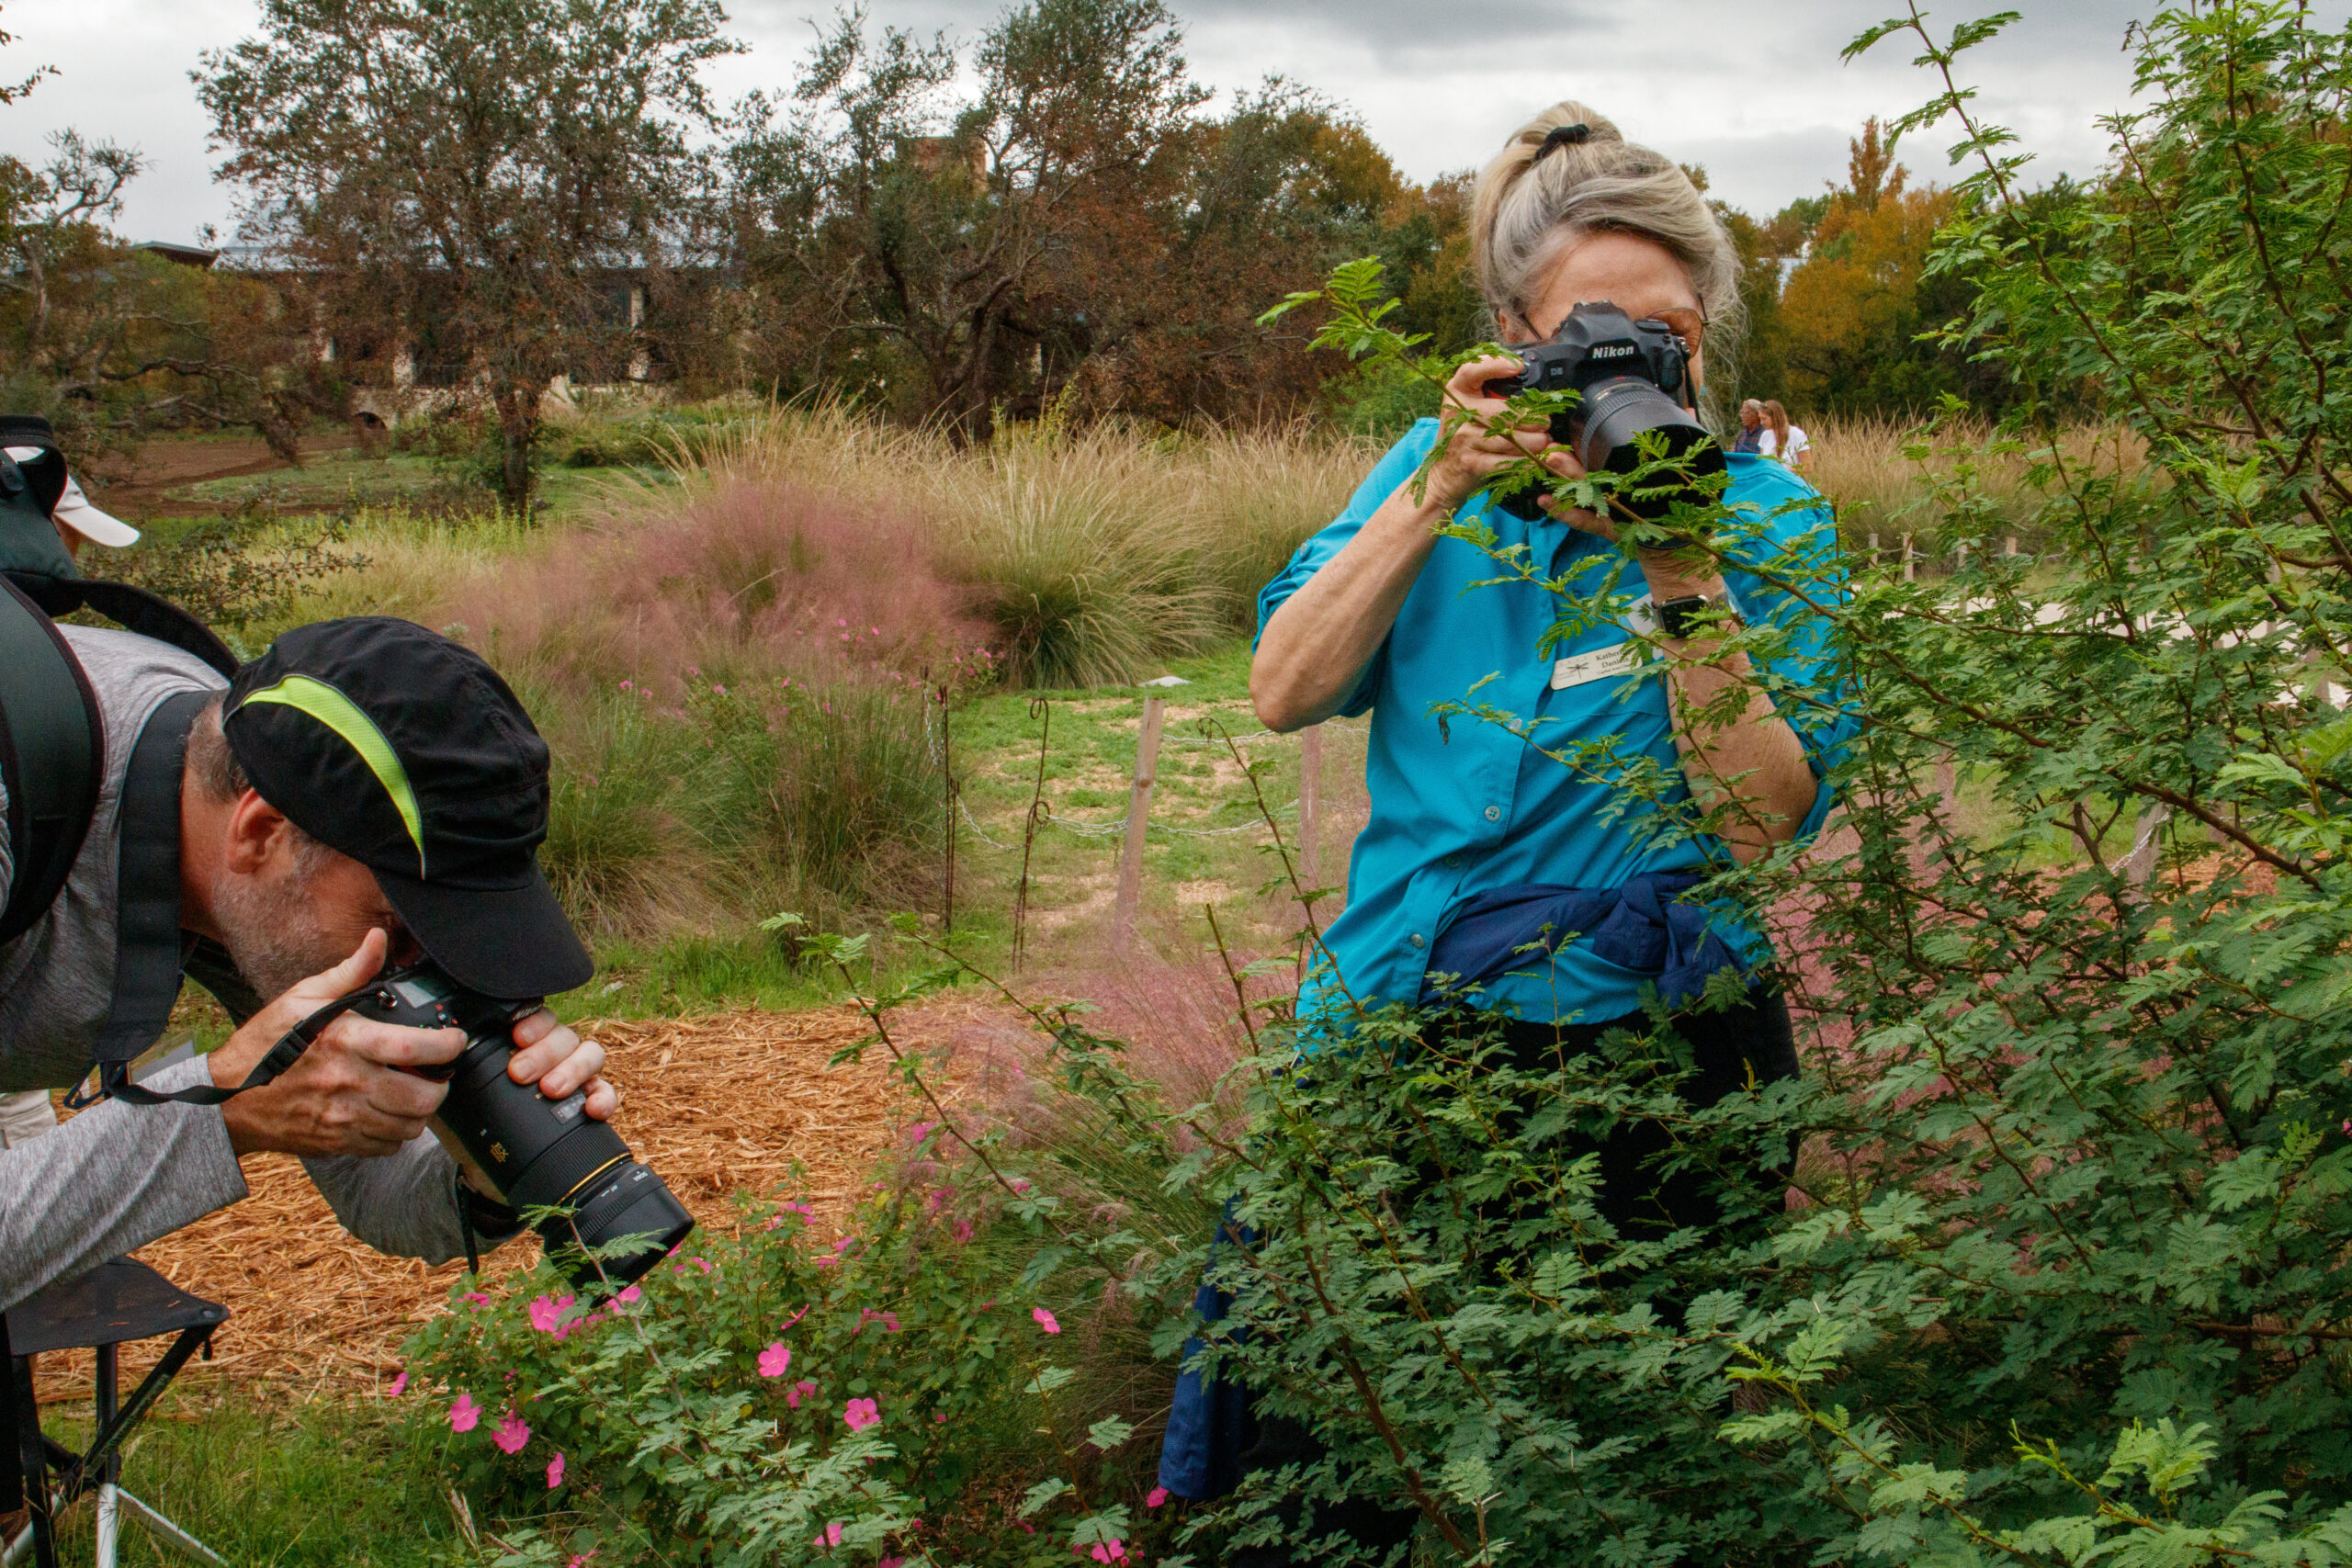 A white man and white woman in sensible outdoor clothing take photos among native plants, some of which are sprouting bright pink flowers.